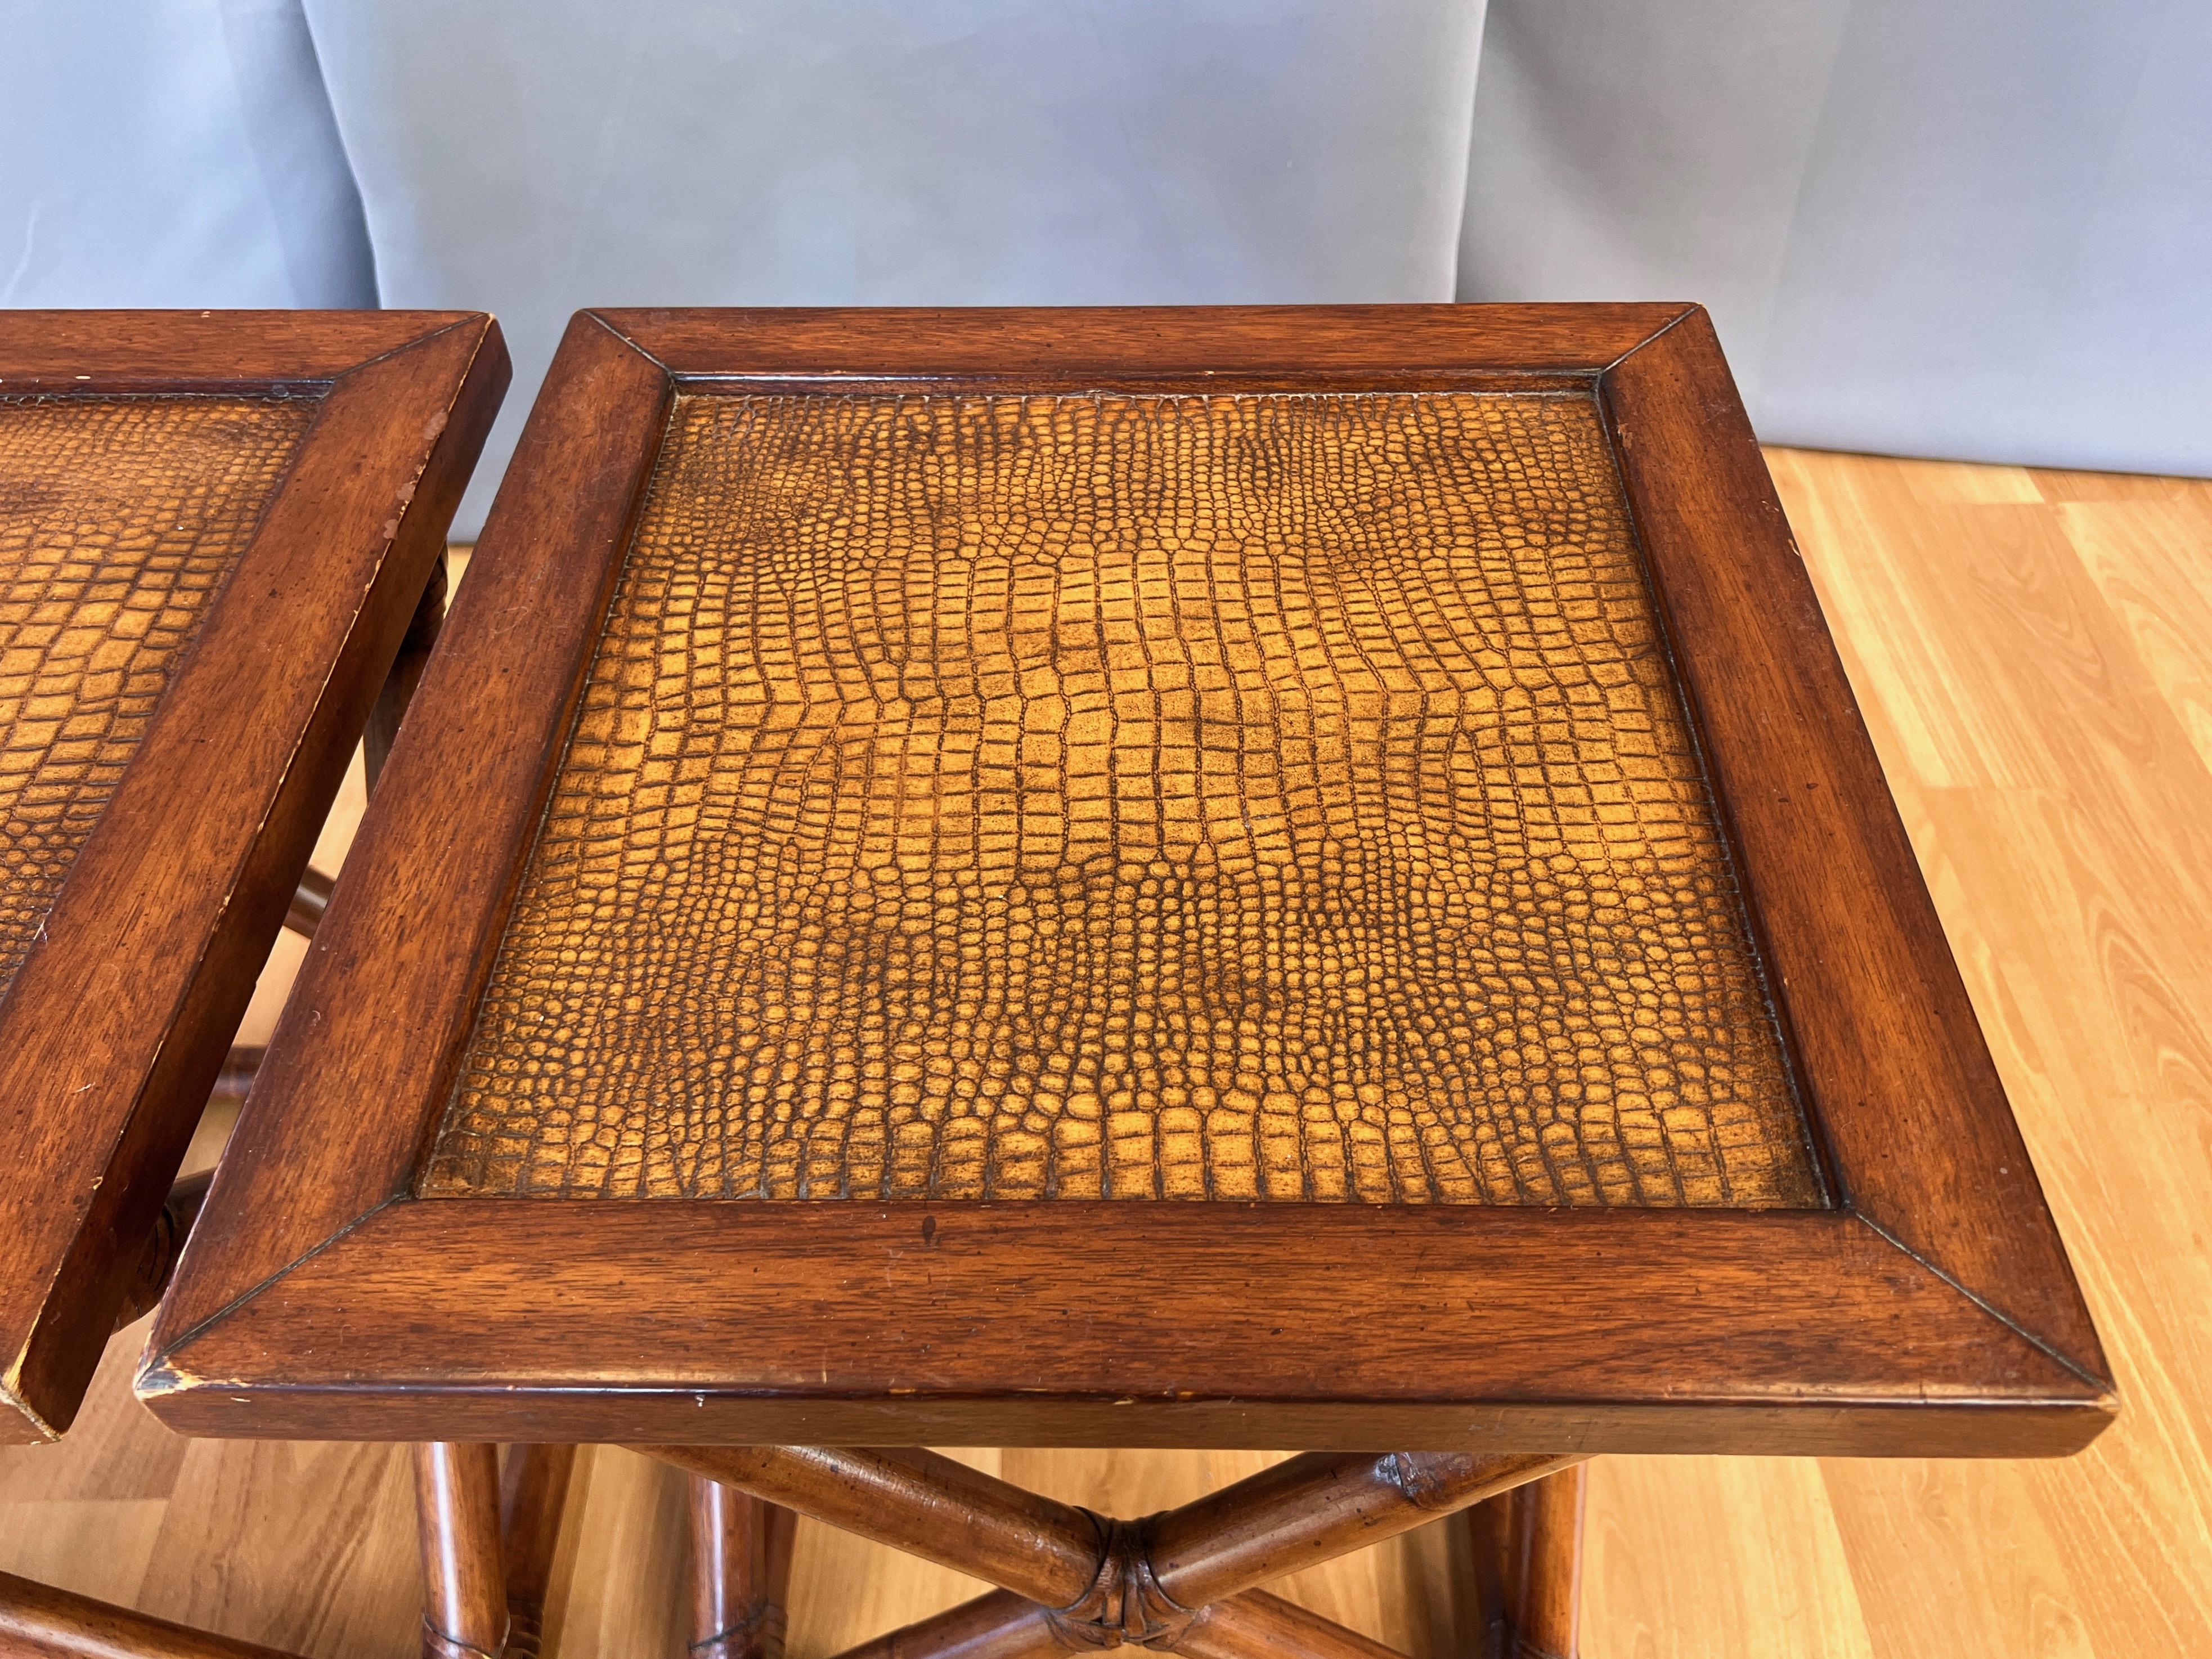 Pair of Palecek Rattan End Tables with Faux Crocodile Leather Tops, c. 2010 For Sale 4